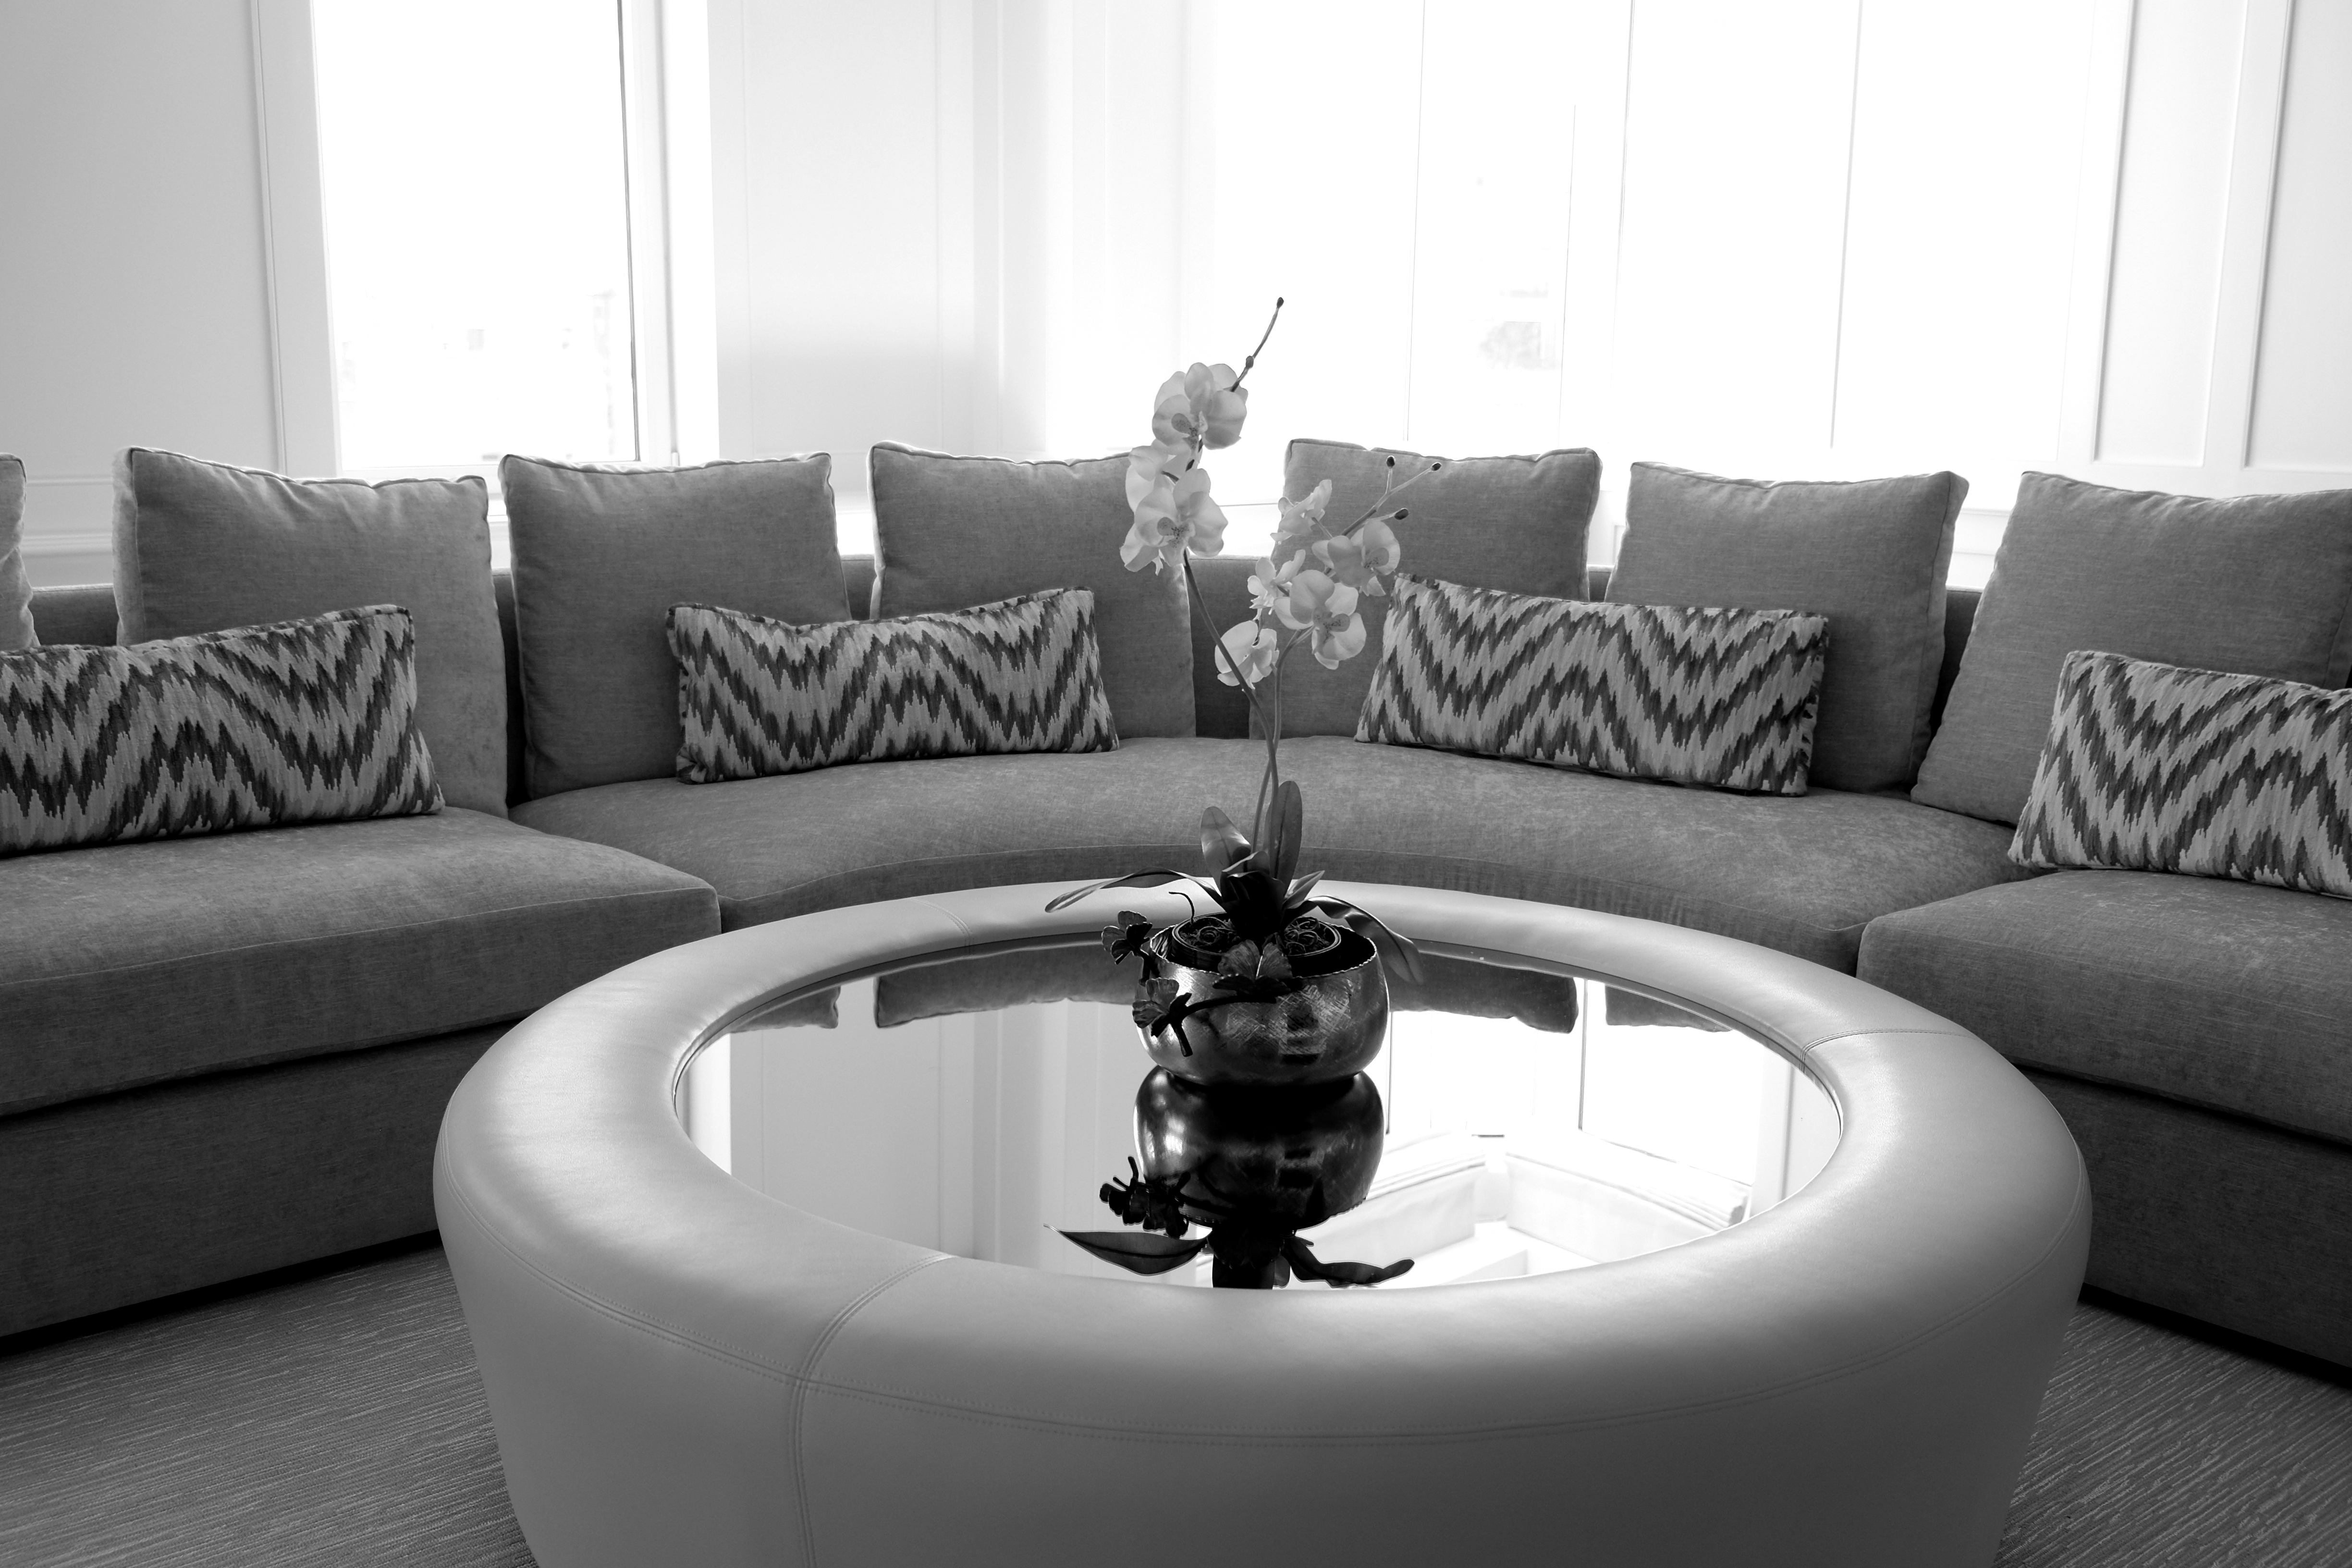 Custom upholstered sofa and ottoman with glass top by Bespoke by Luigi Gentile